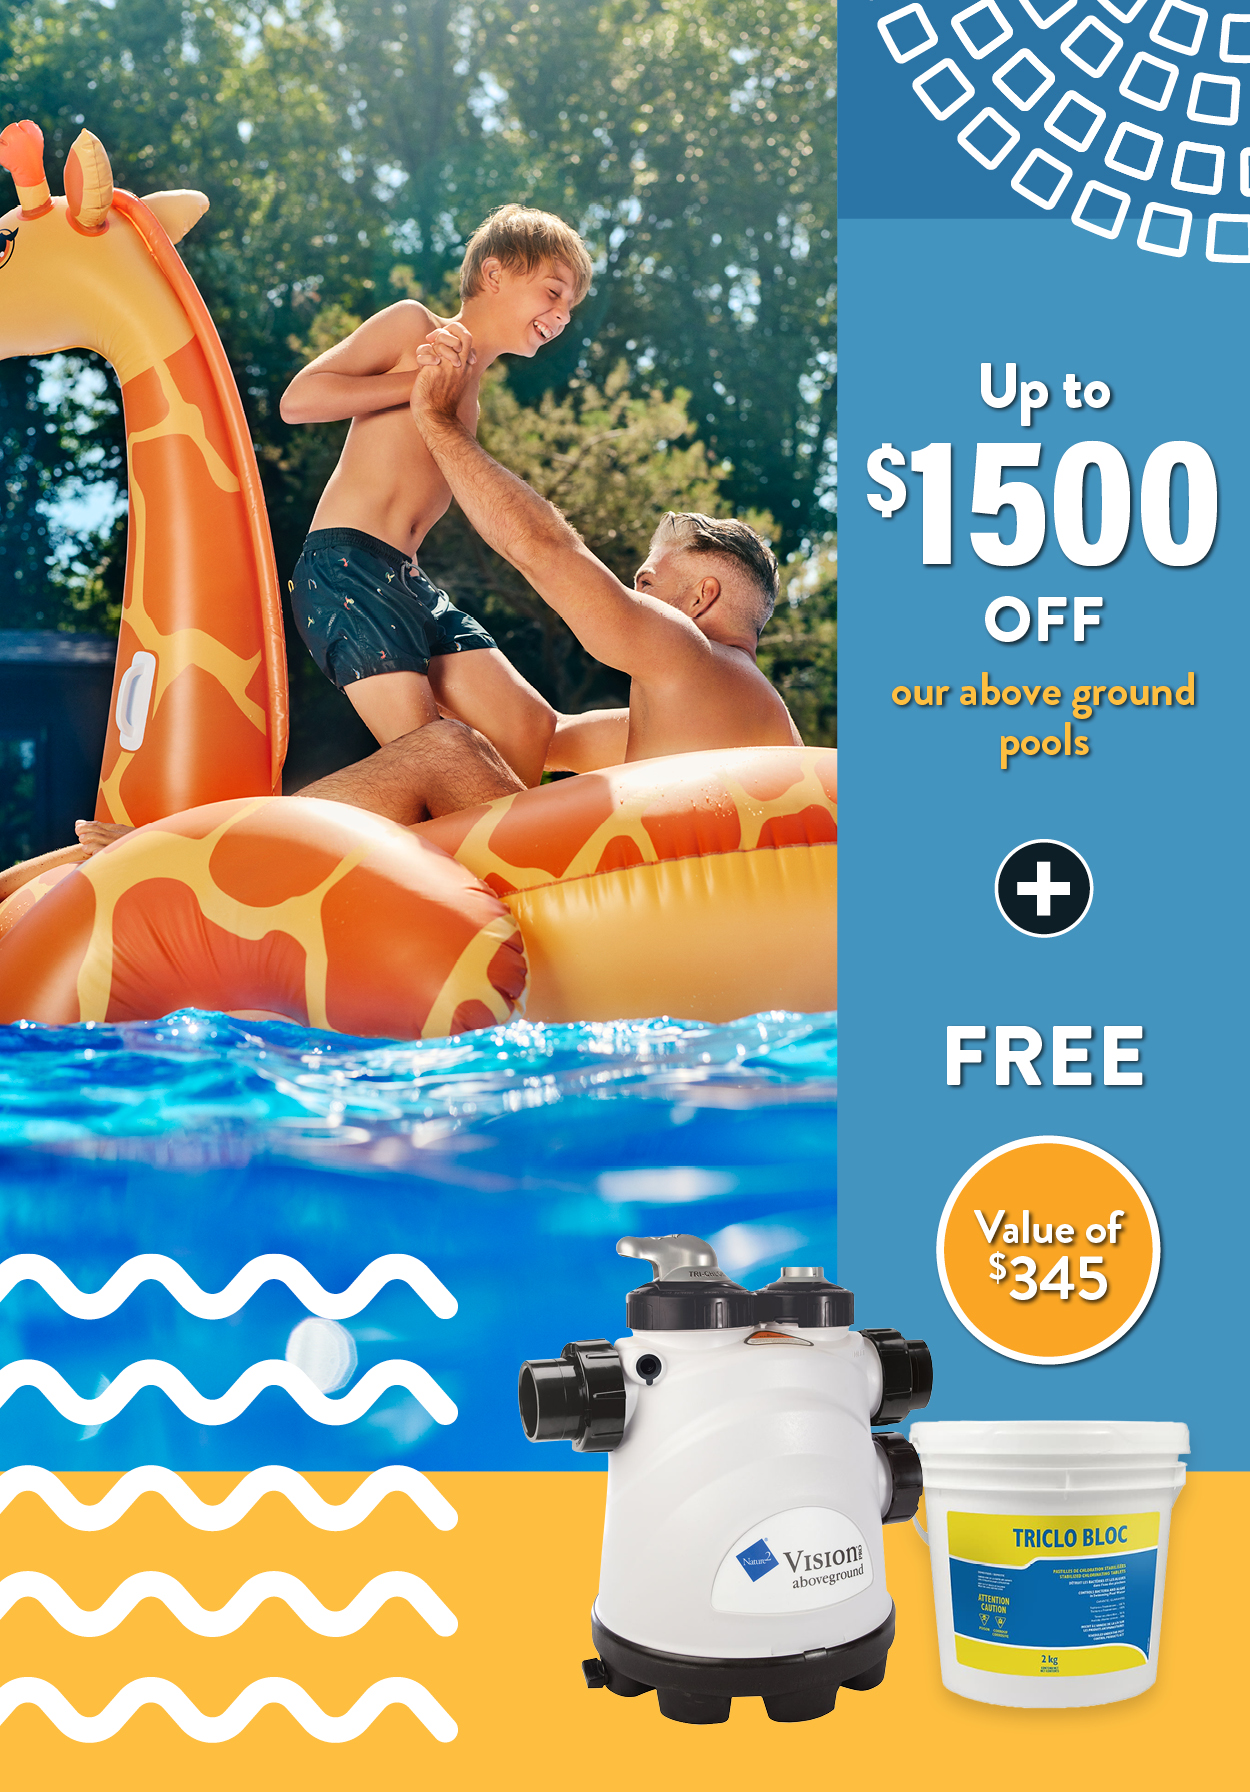 Up to $1,500 off our above ground pools!